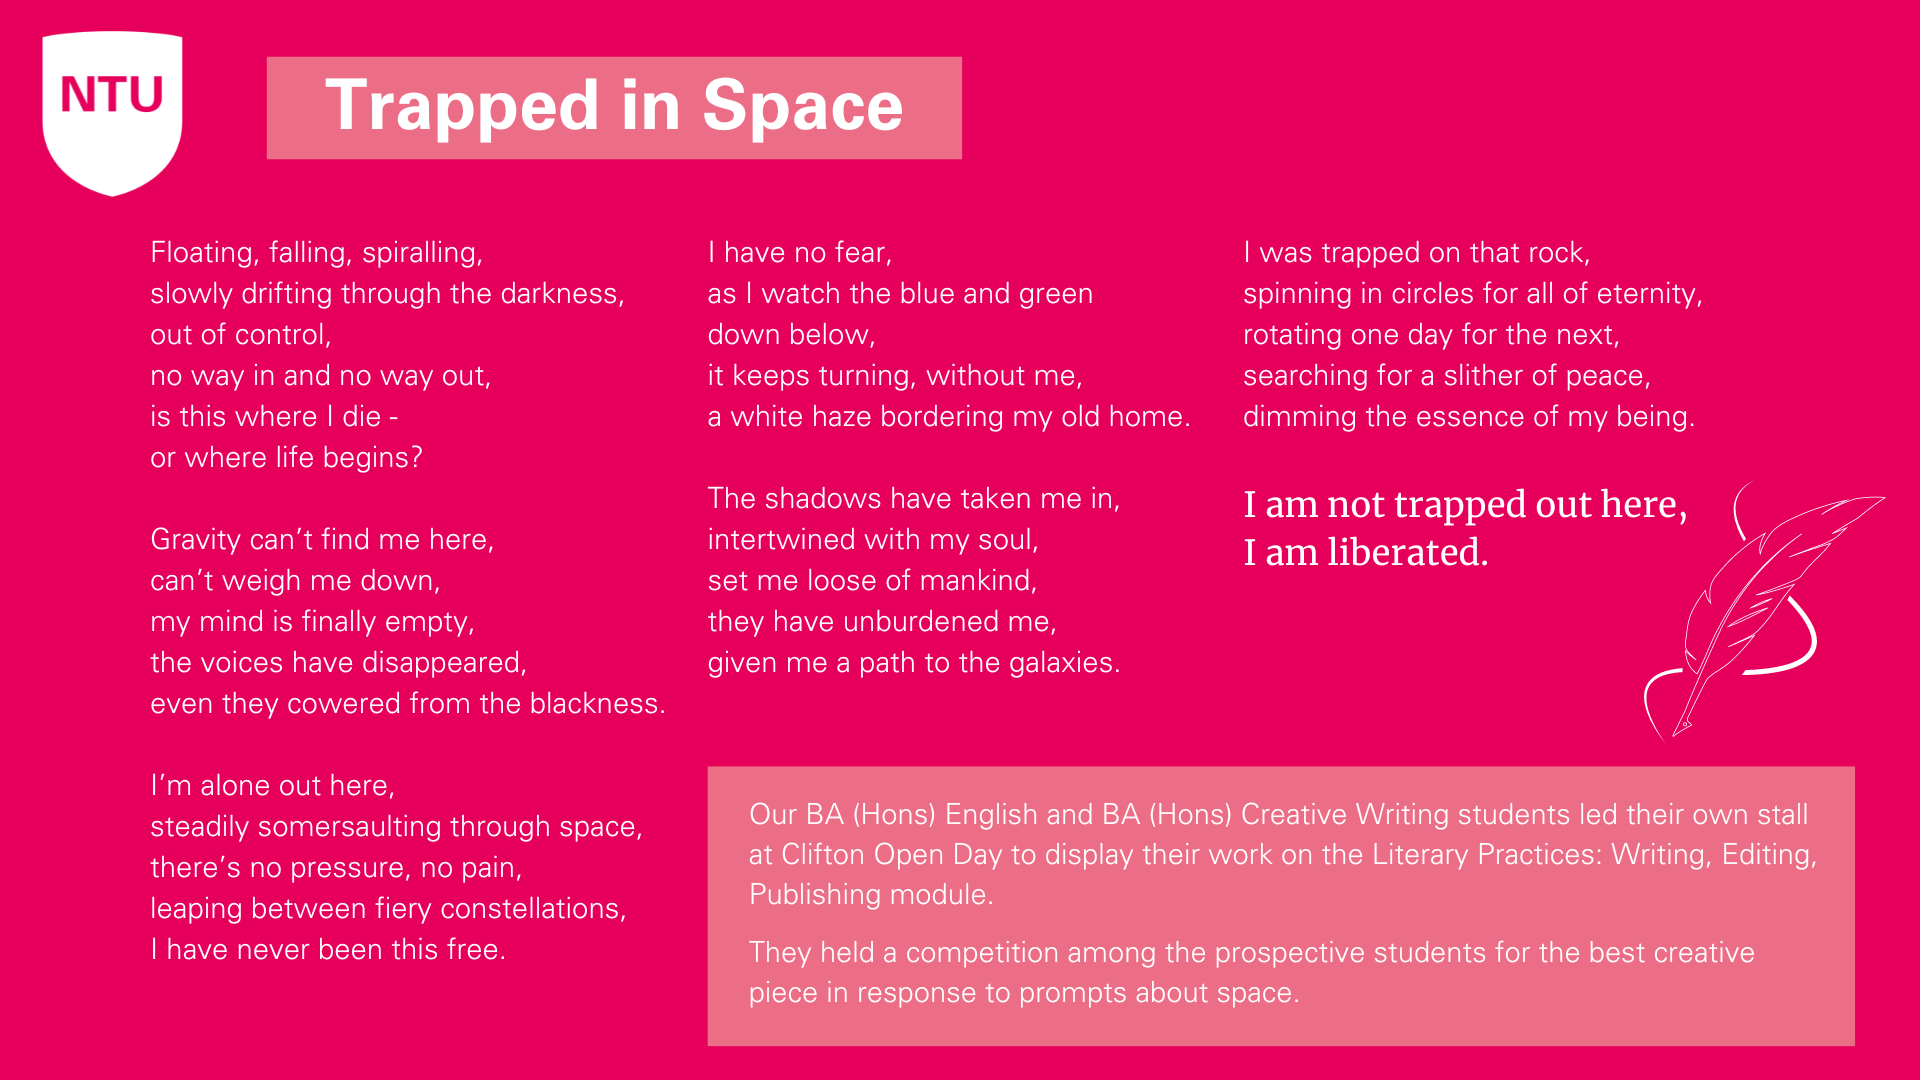 Trapped in Space, an open day poem